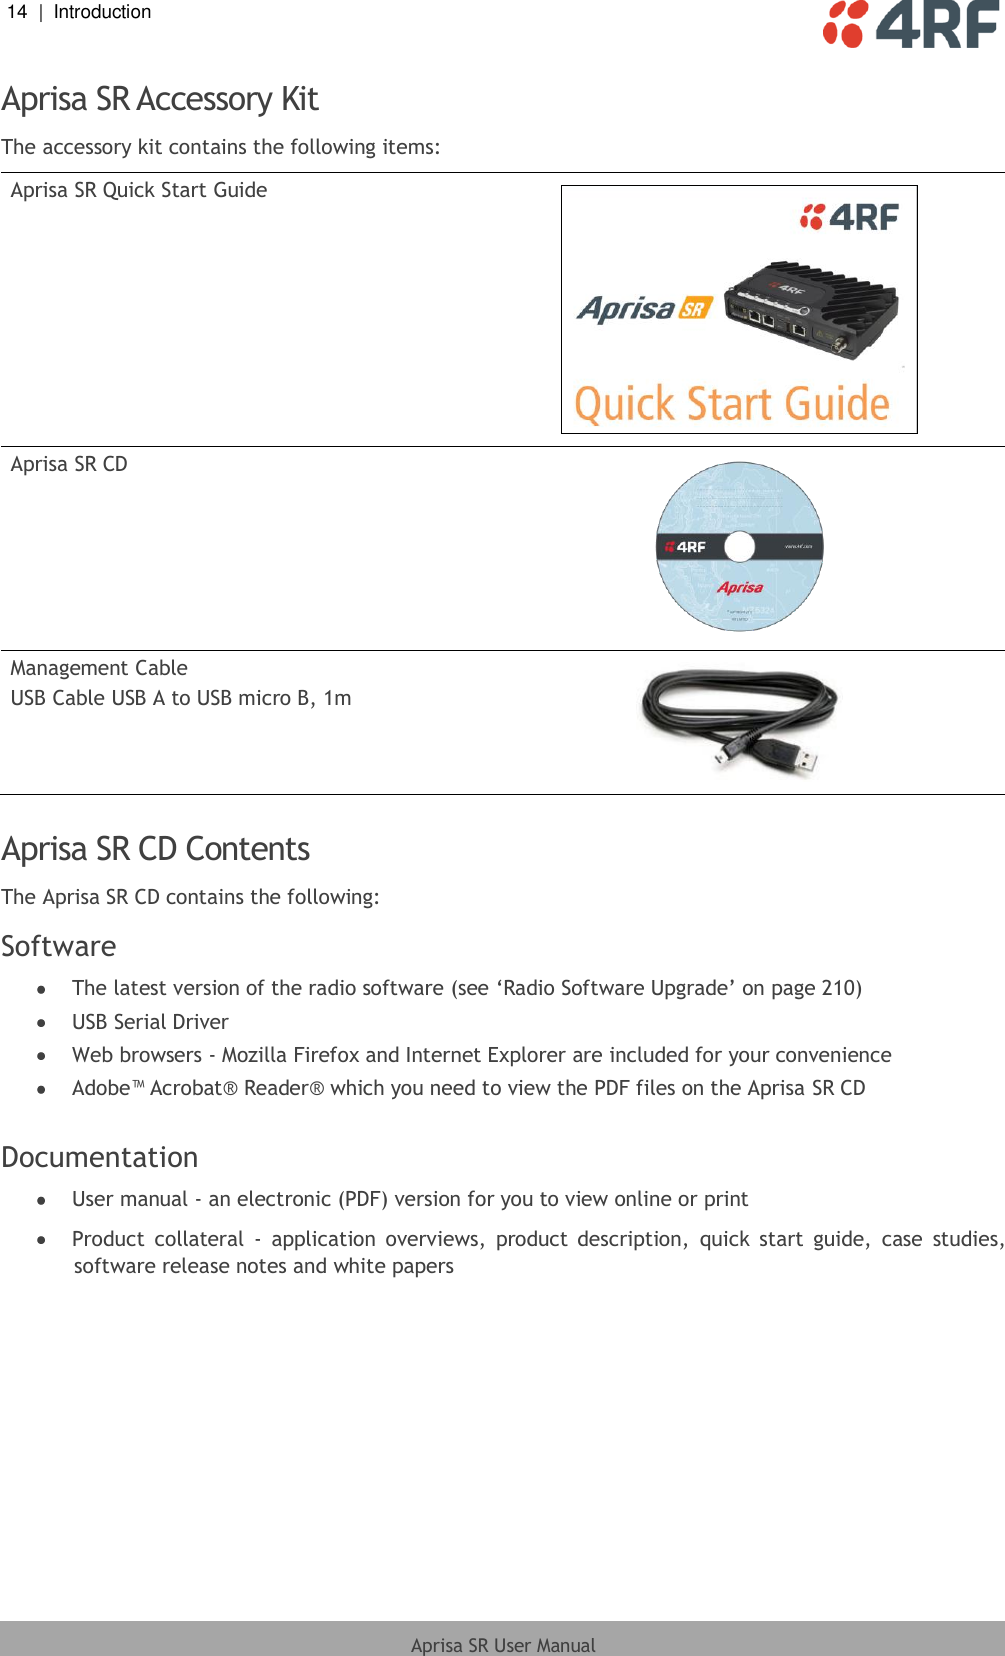 14  |  Introduction   Aprisa SR User Manual  Aprisa SR Accessory Kit The accessory kit contains the following items: Aprisa SR Quick Start Guide  Aprisa SR CD  Management Cable USB Cable USB A to USB micro B, 1m   Aprisa SR CD Contents The Aprisa SR CD contains the following: Software  The latest version of the radio software (see ‘Radio Software Upgrade’ on page 210)  USB Serial Driver  Web browsers - Mozilla Firefox and Internet Explorer are included for your convenience  Adobe™ Acrobat® Reader® which you need to view the PDF files on the Aprisa SR CD  Documentation  User manual - an electronic (PDF) version for you to view online or print  Product  collateral  -  application  overviews,  product  description,  quick  start  guide,  case  studies, software release notes and white papers   